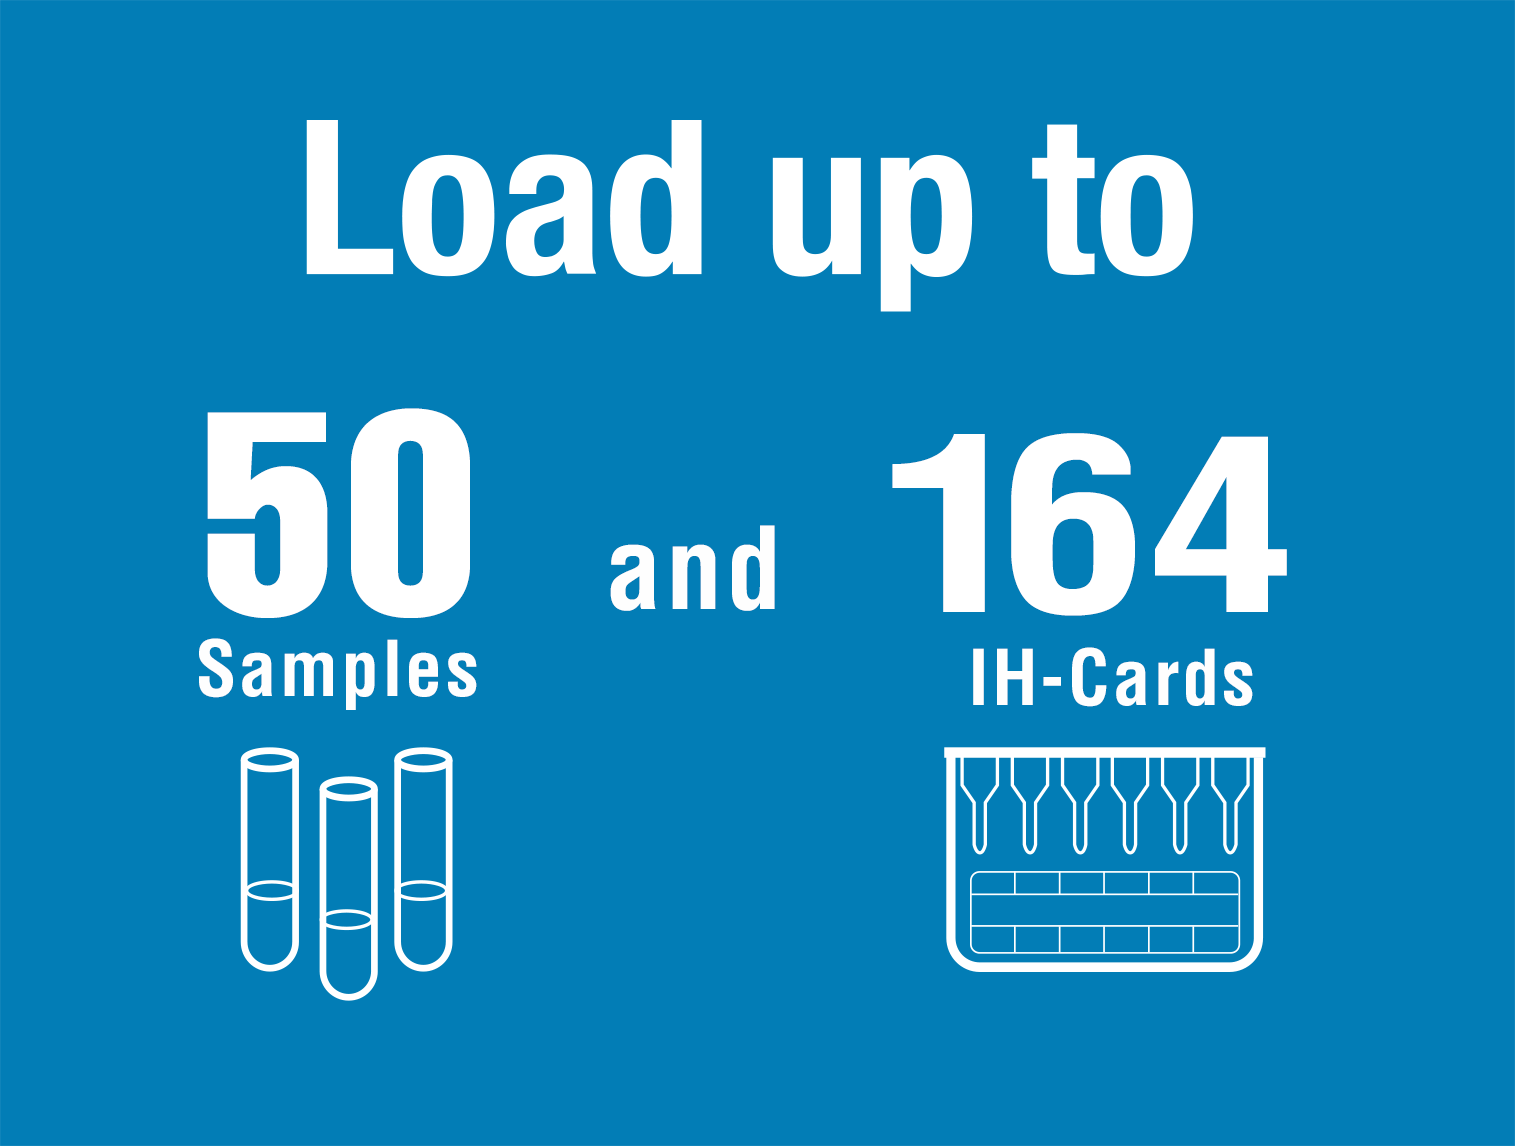 load up to 50 samples and 164 id-cards